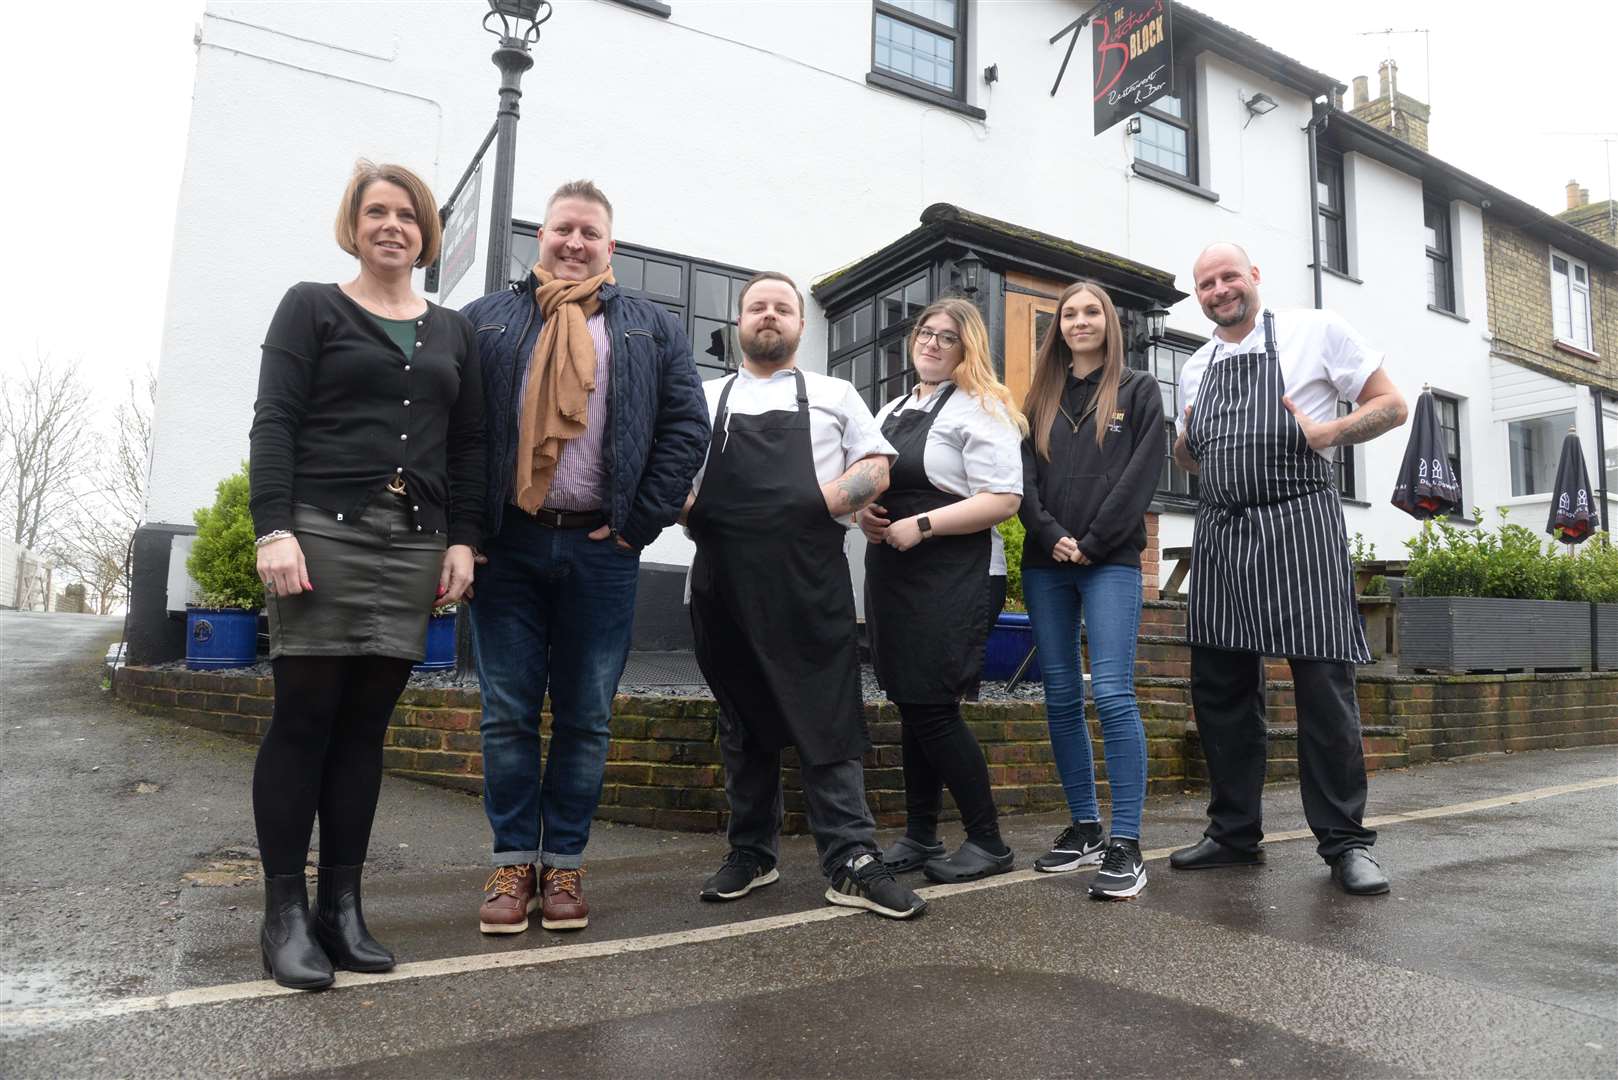 Joanna and Simon Rickwood (left) with their team at the Butcher's Block in Burham.